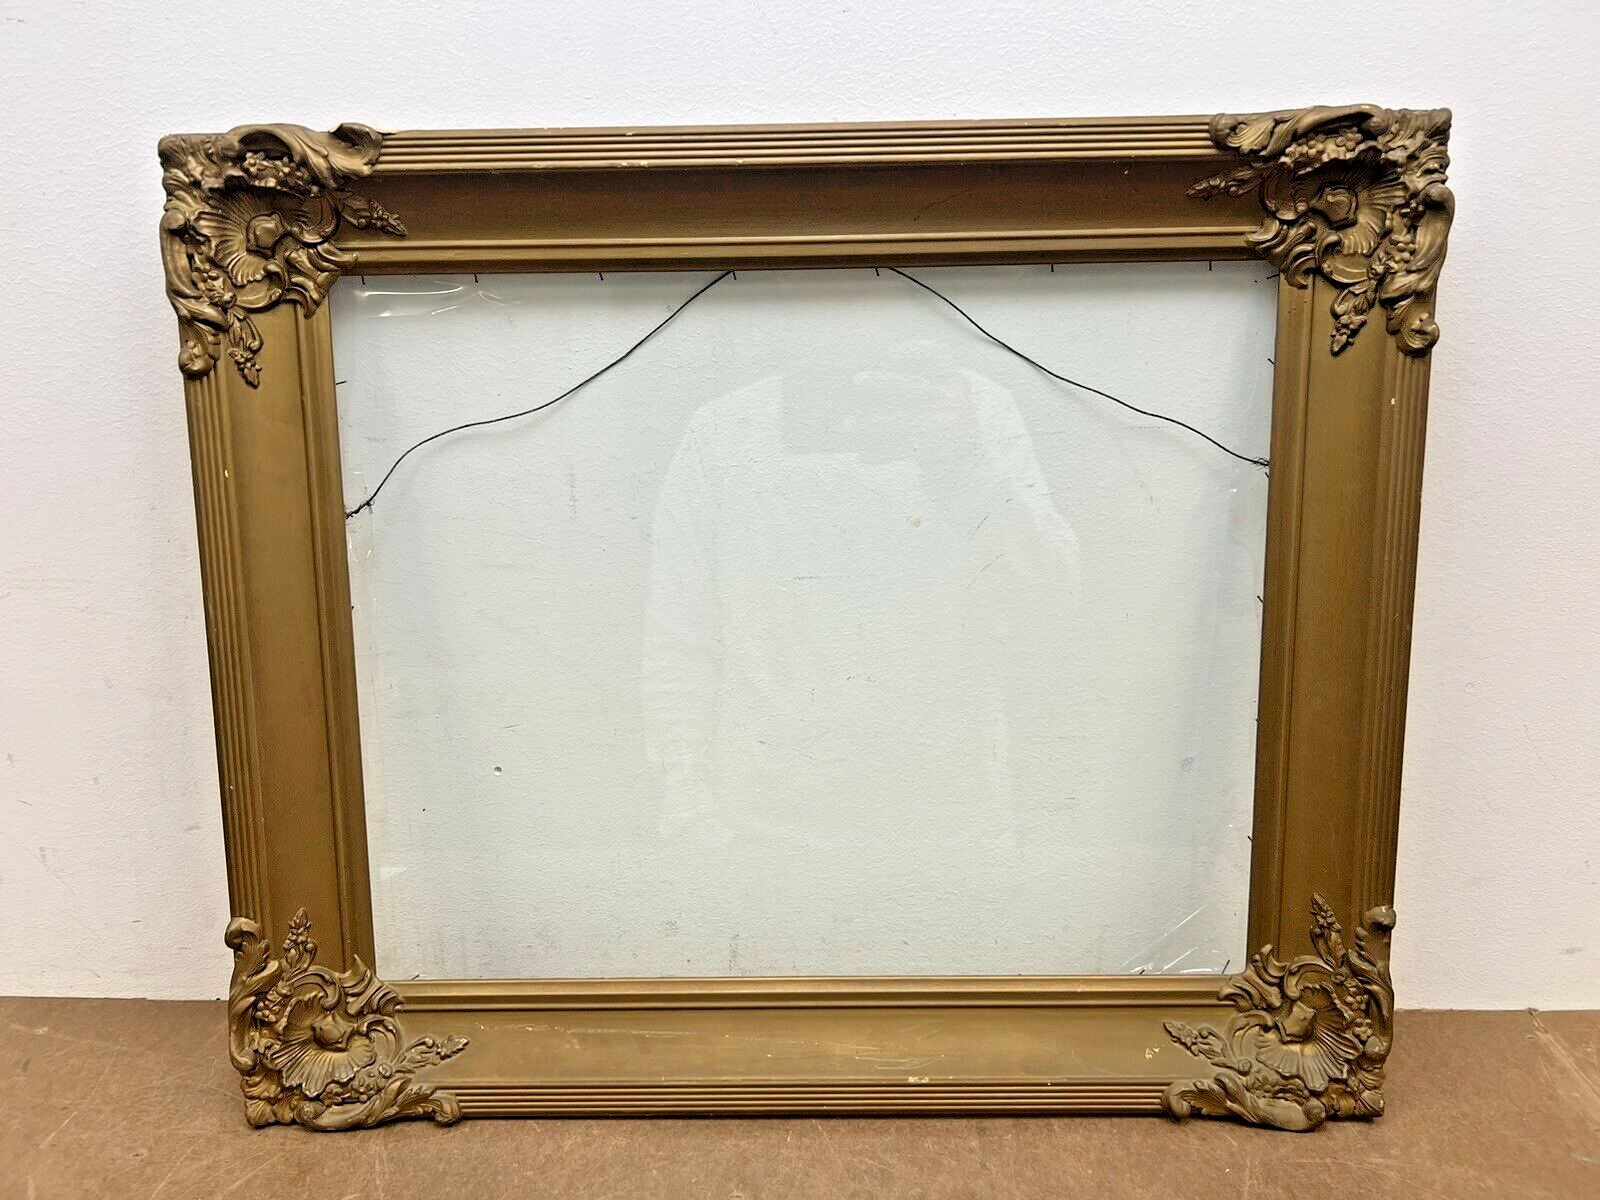 Antique Picture Frame gold wood vintage ornate gesso FITS 16 x 20 LARGE layered